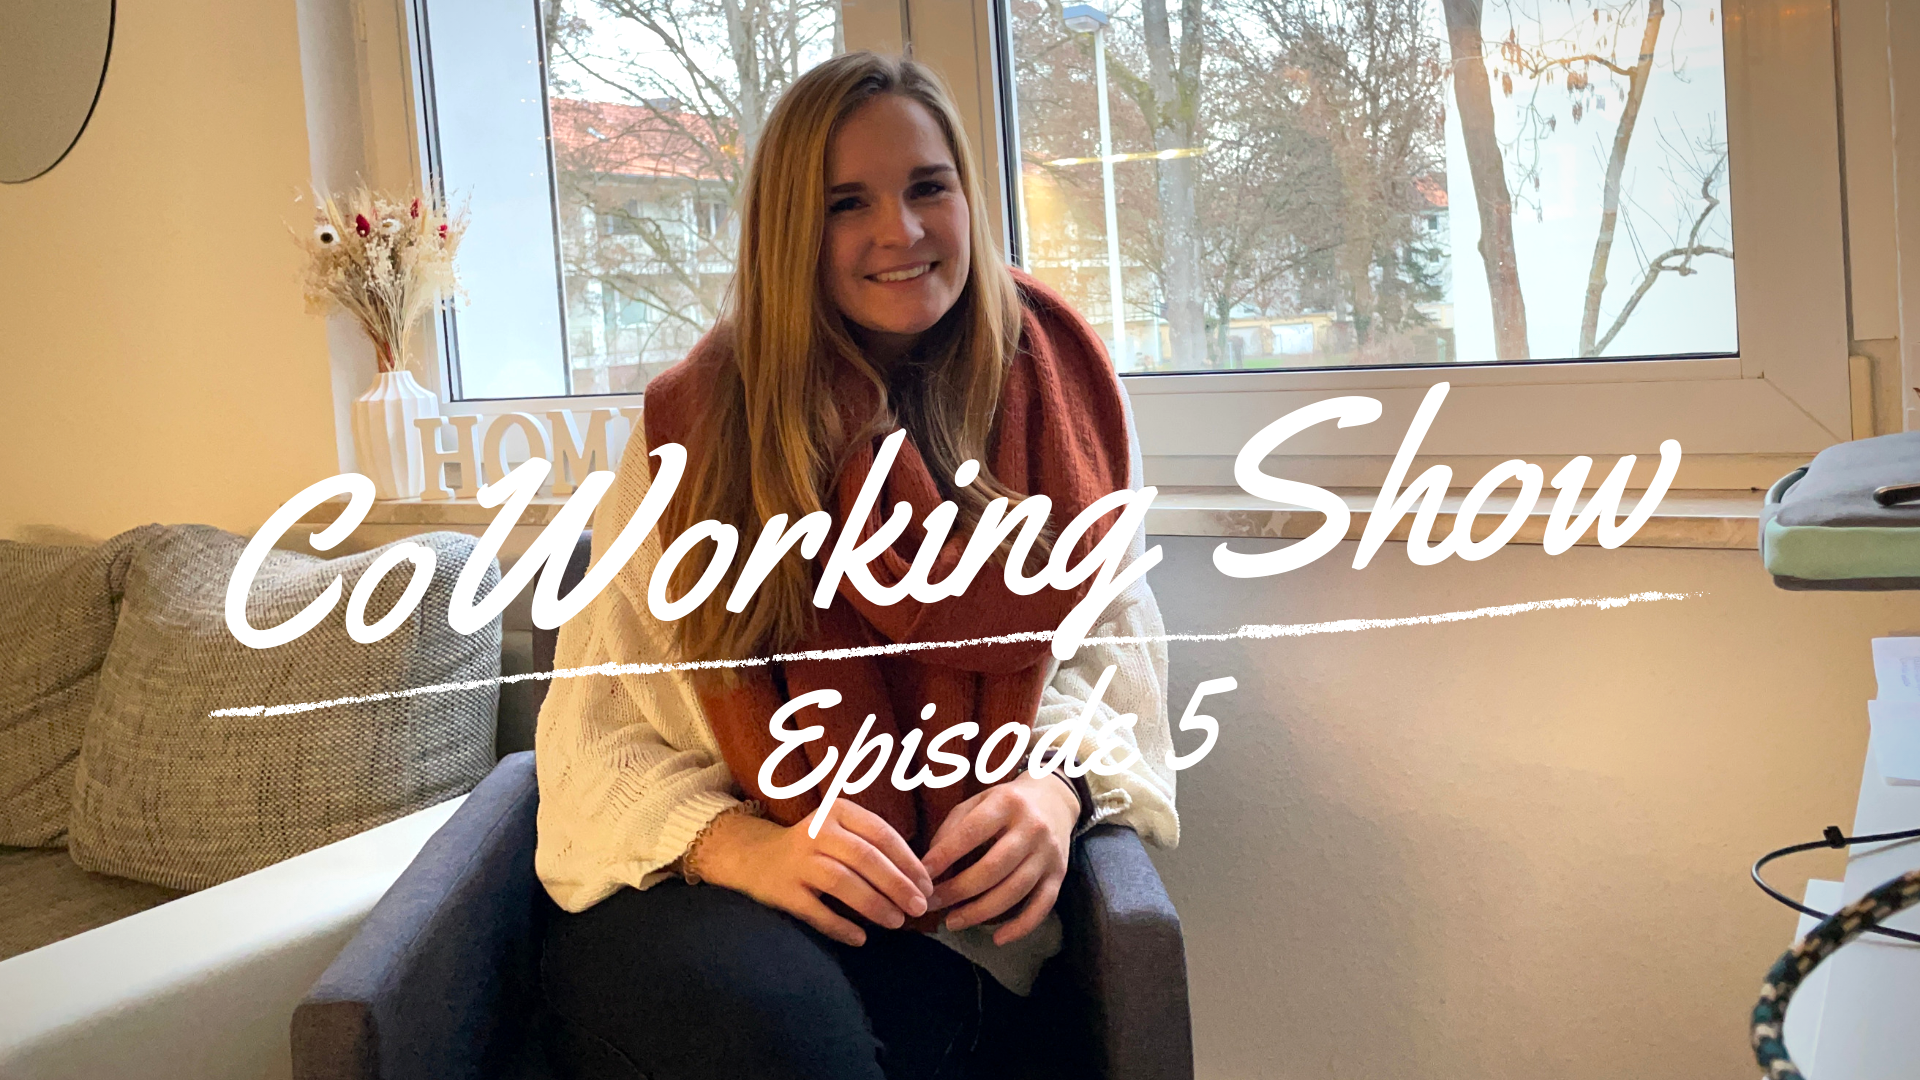 How to make the most out of your coworking trip | CoWorking Show